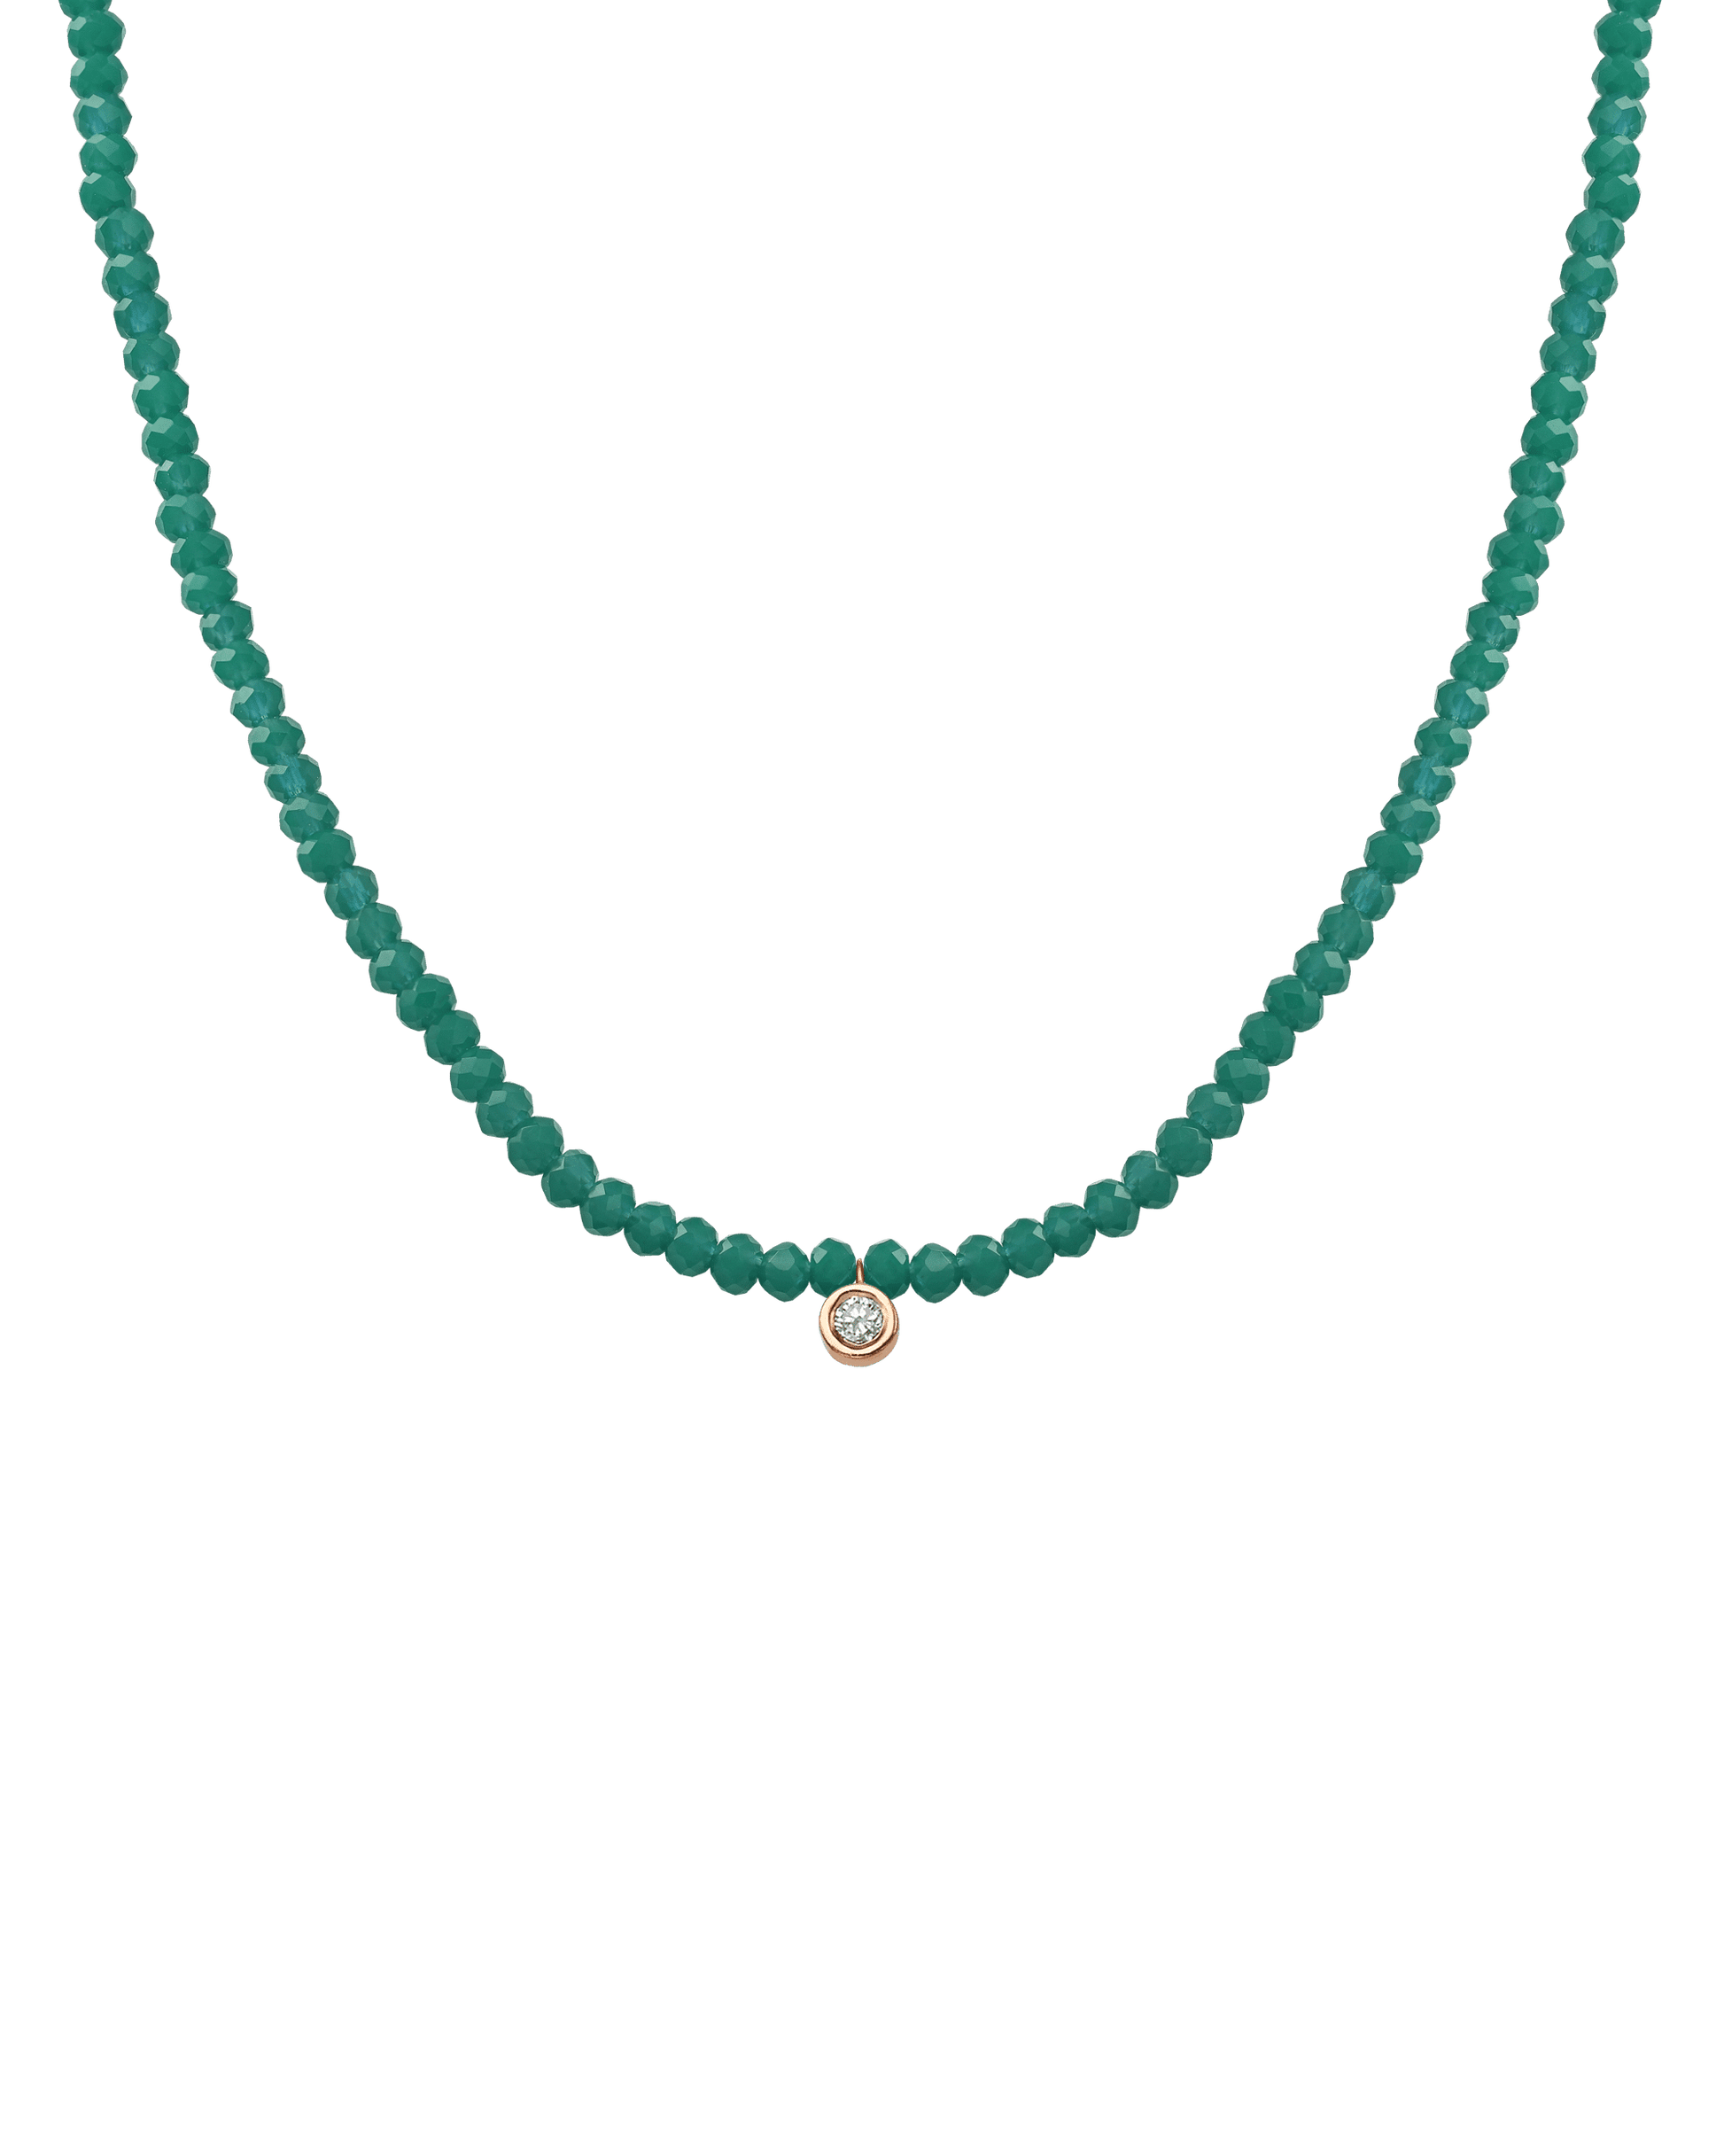 The Gemstone & Diamond Necklace - 14K Rose Gold Necklaces 14K Solid Gold Natural Emerald Medium: 0.04ct 14"